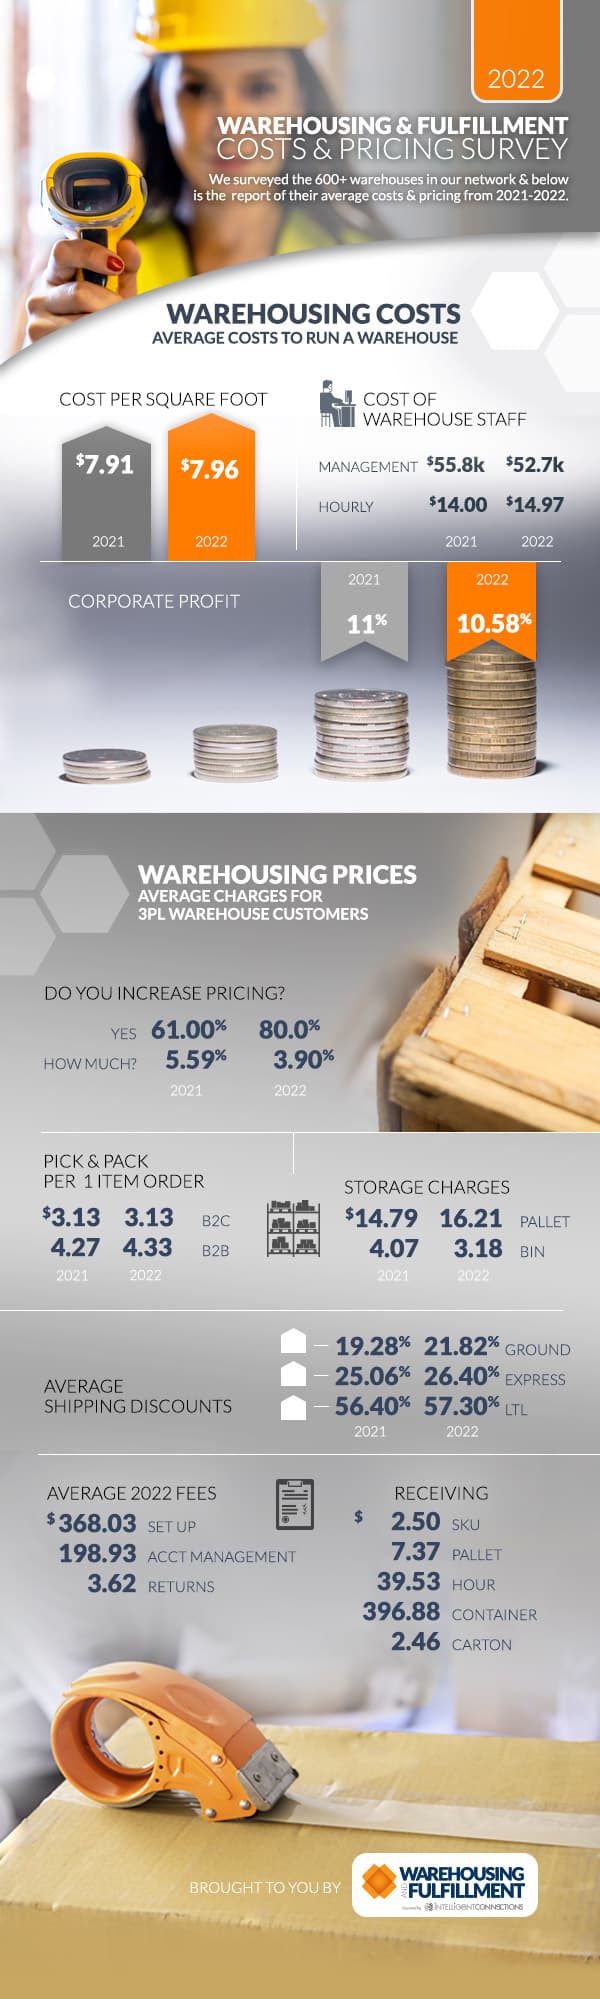 2022 3PL Warehouse Costs